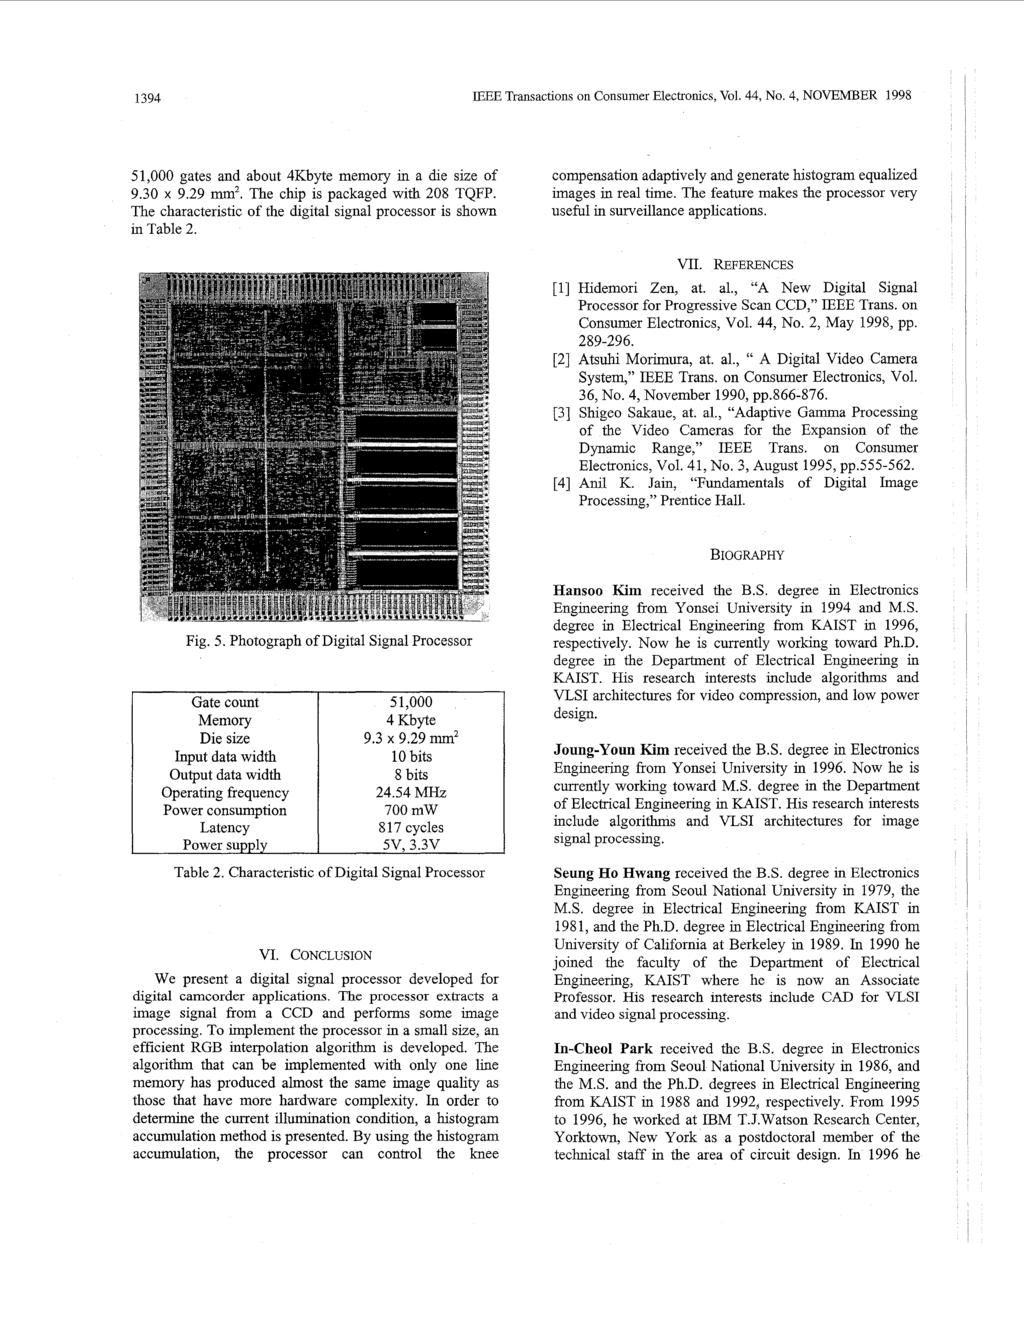 1394 BEE Transactions on Consumer Electronics, Vol. 44, No. 4, NOVEMBER 1998 51,000 gates and about 4Kbyte memory in a &e size of 9.30 x 9.29 nun2. The chip is packaged with 208 TQFP.